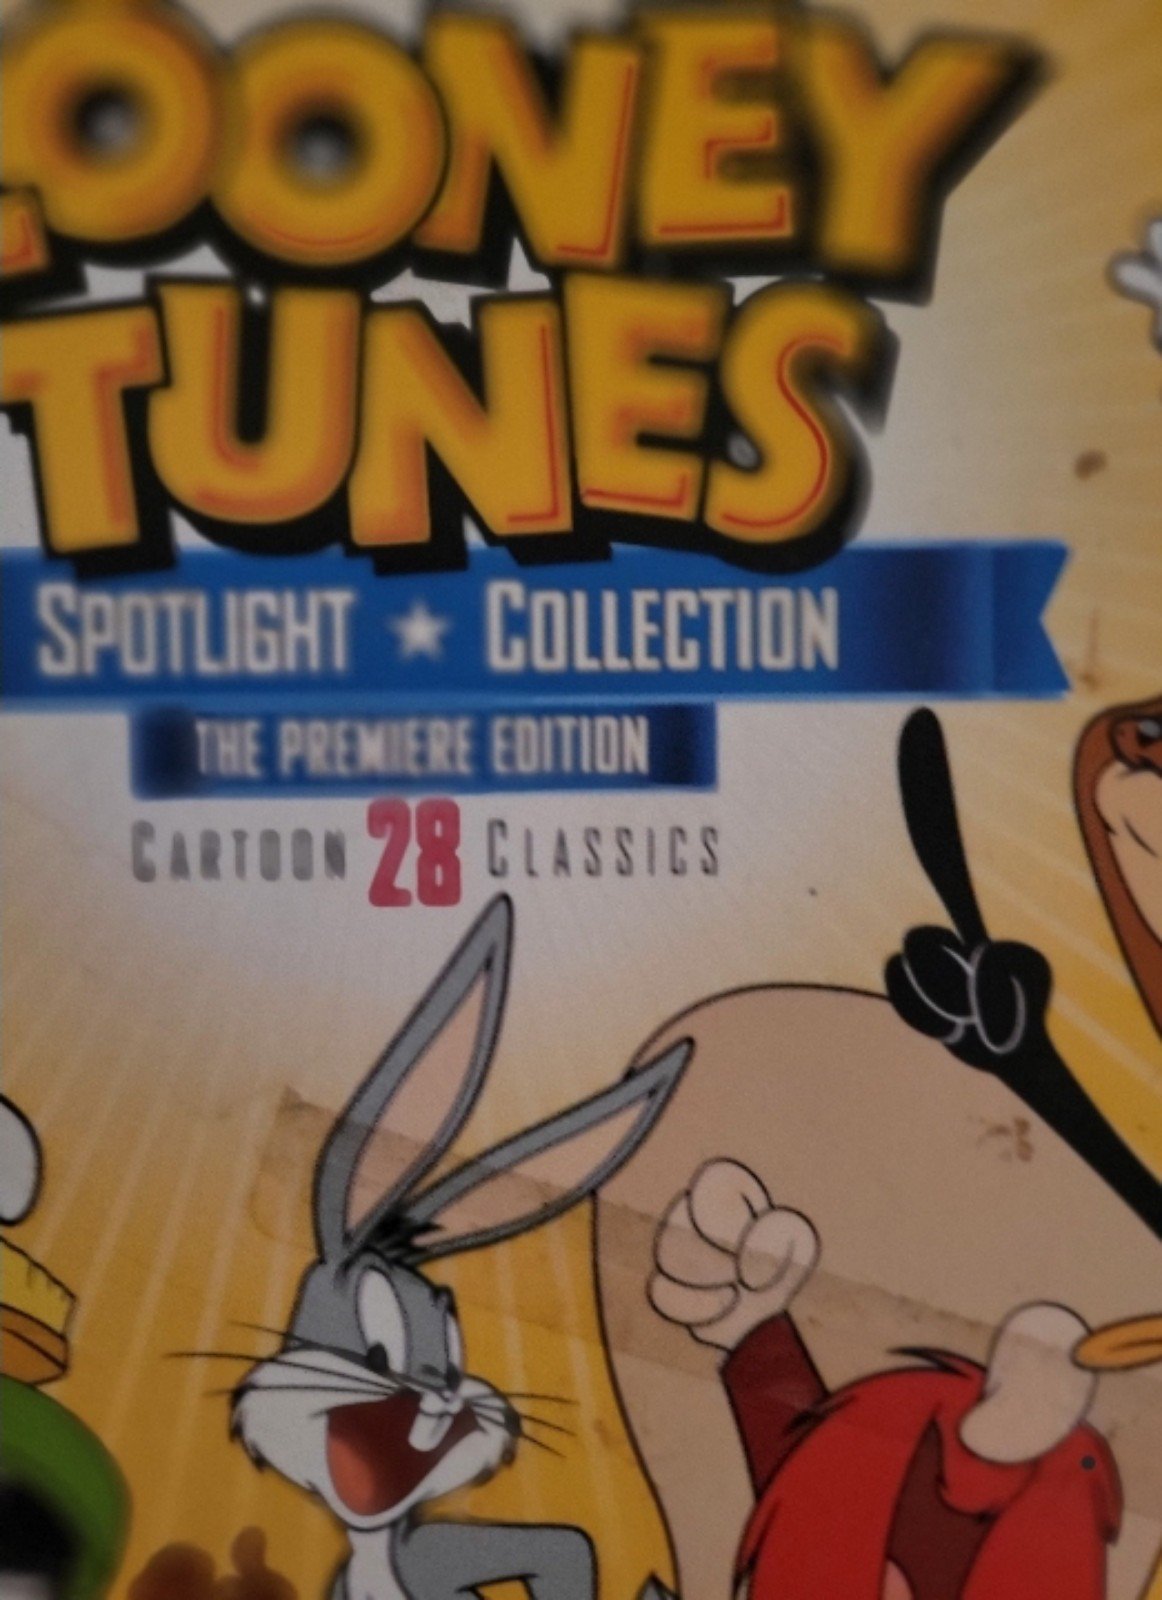 Loony tunes 28 episode spotlight collection JJXjW7GND